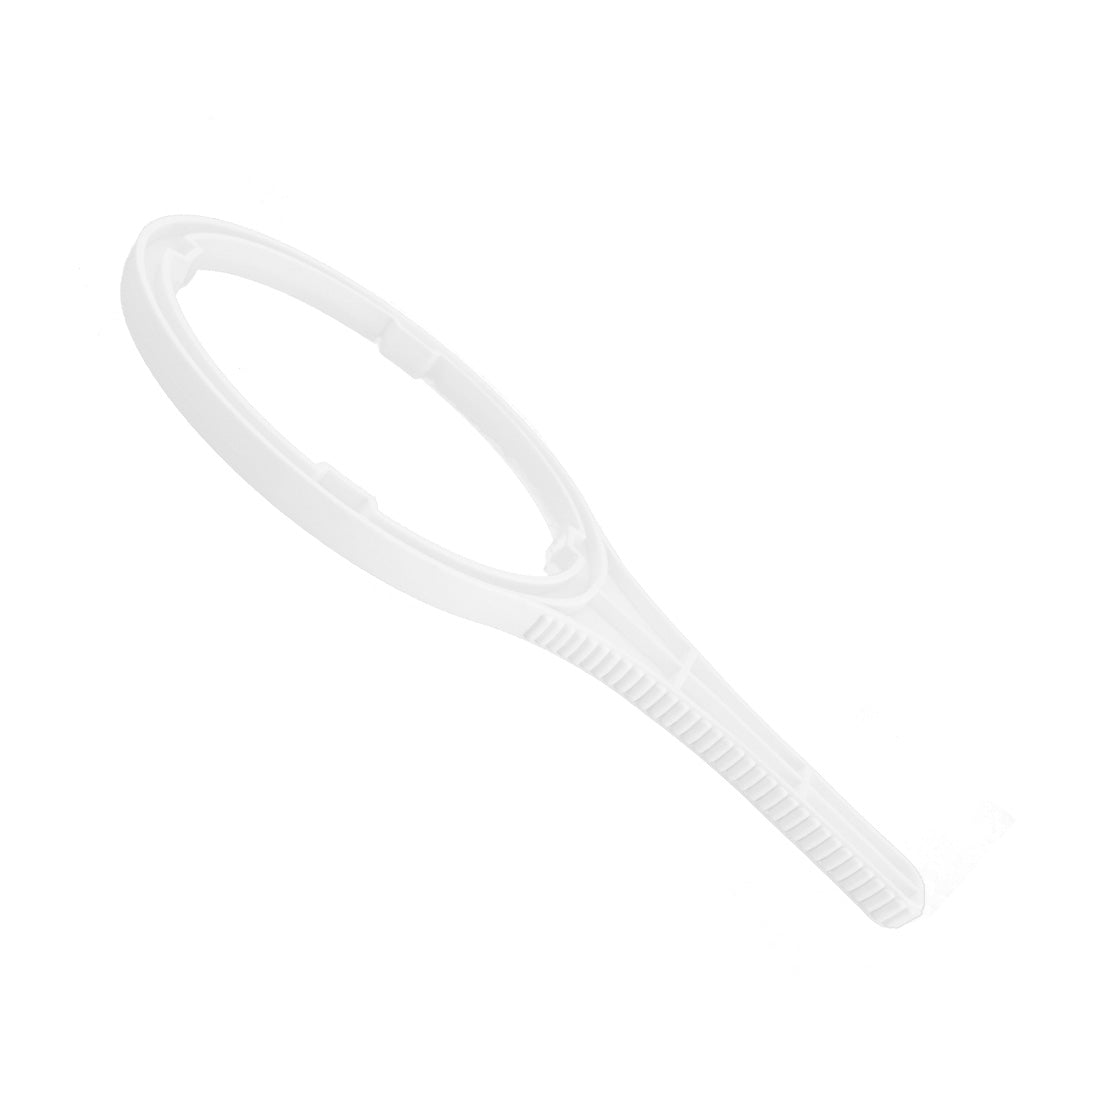 XERO Filter Wrench - Large Angle View